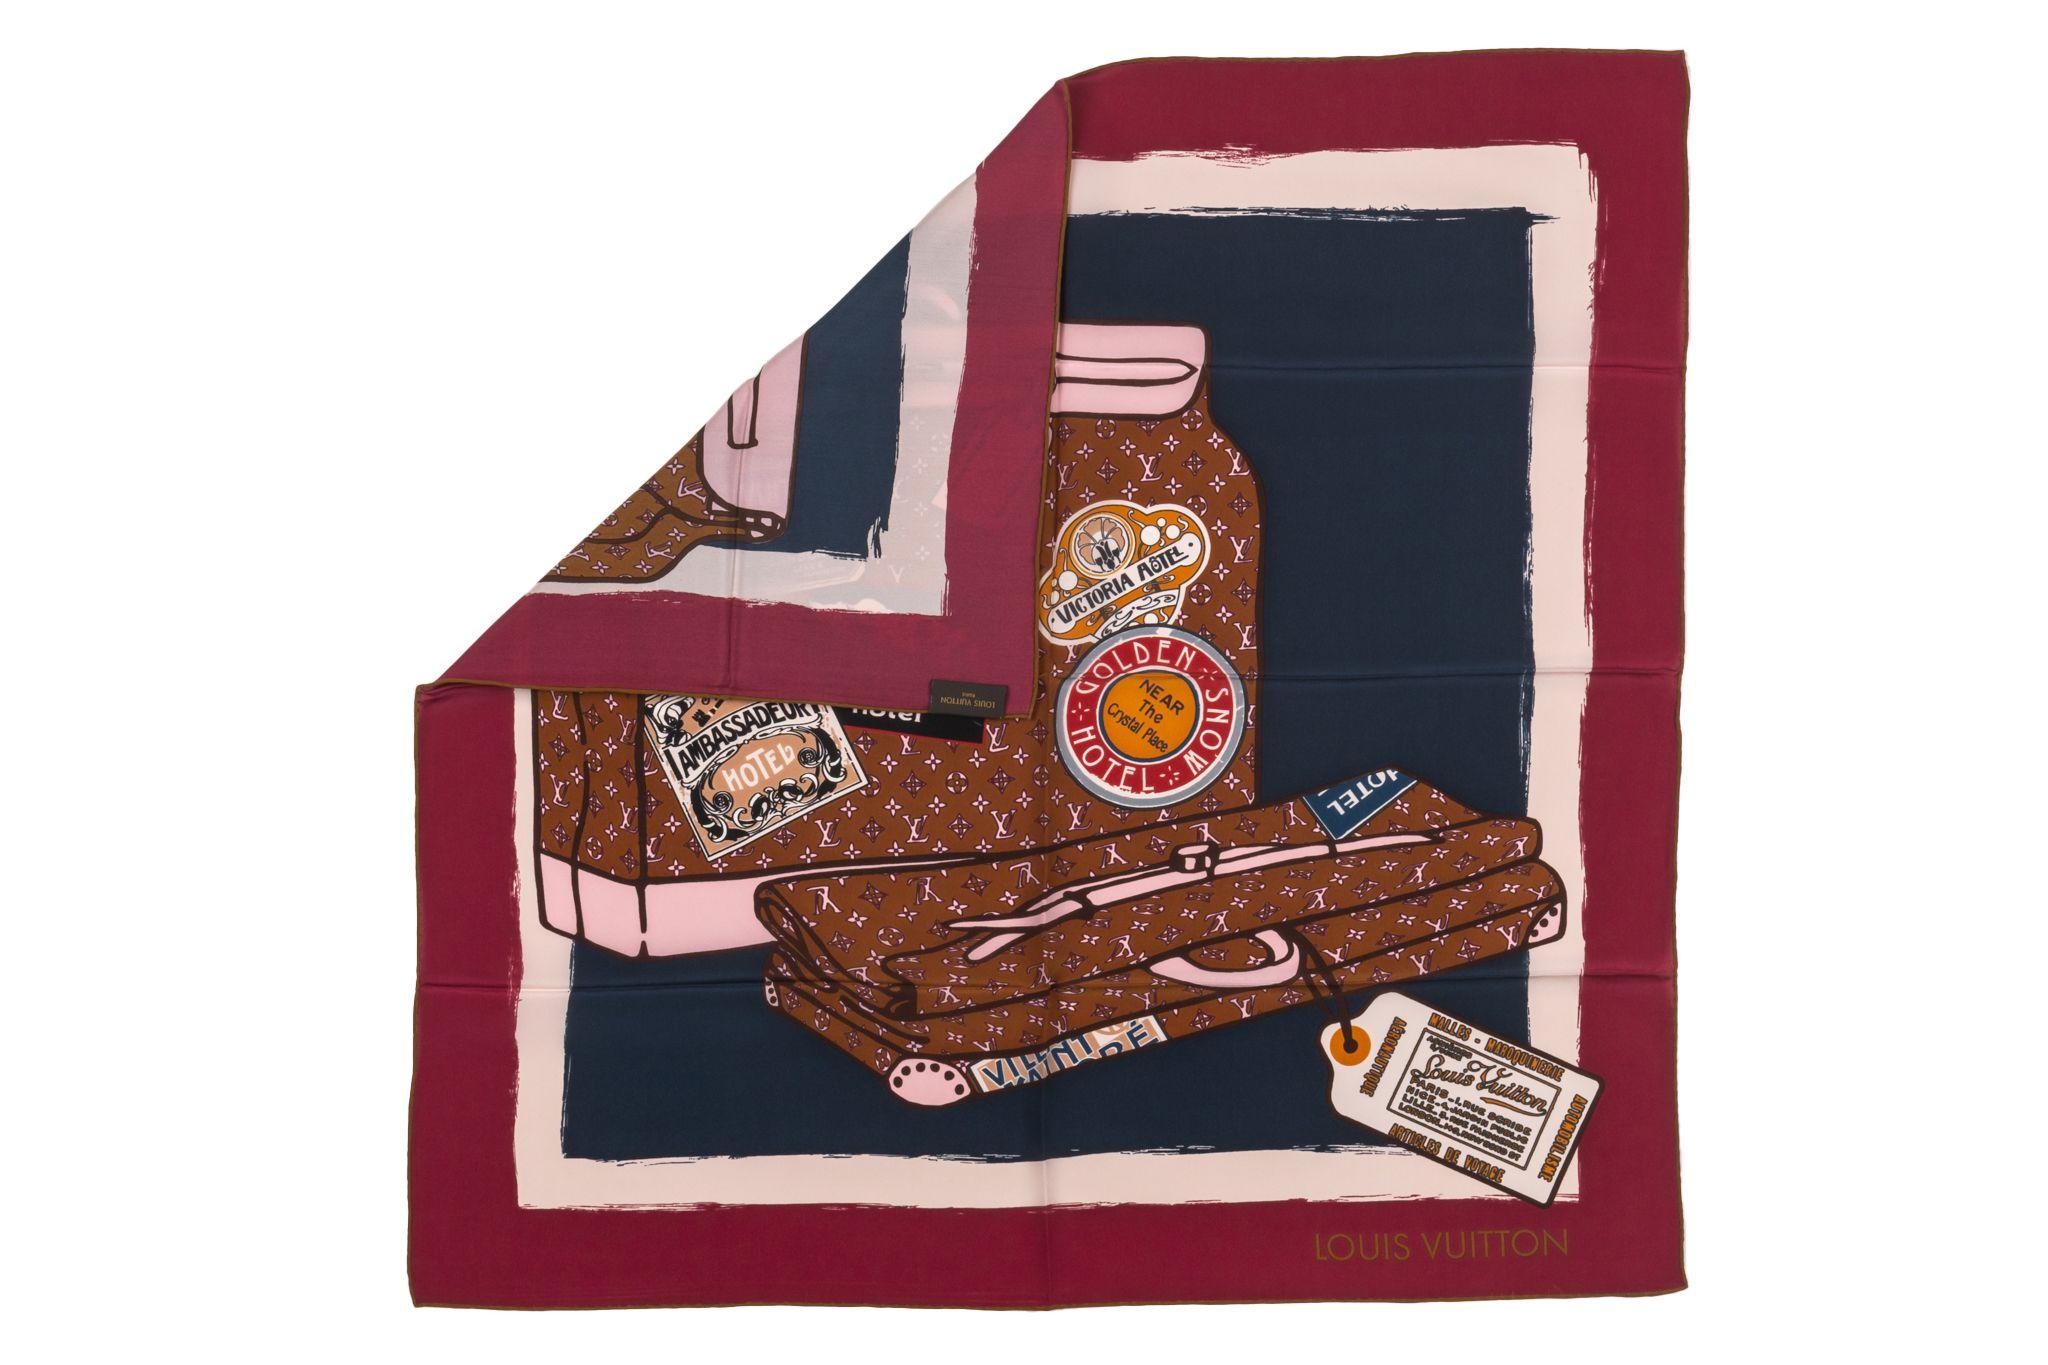 Louis Vuitton Chale Monogram Silk Scarf. The scarf is printed with a luggage themed pattern. The edges are burgundy and rolled. The piece is in unworn condition.